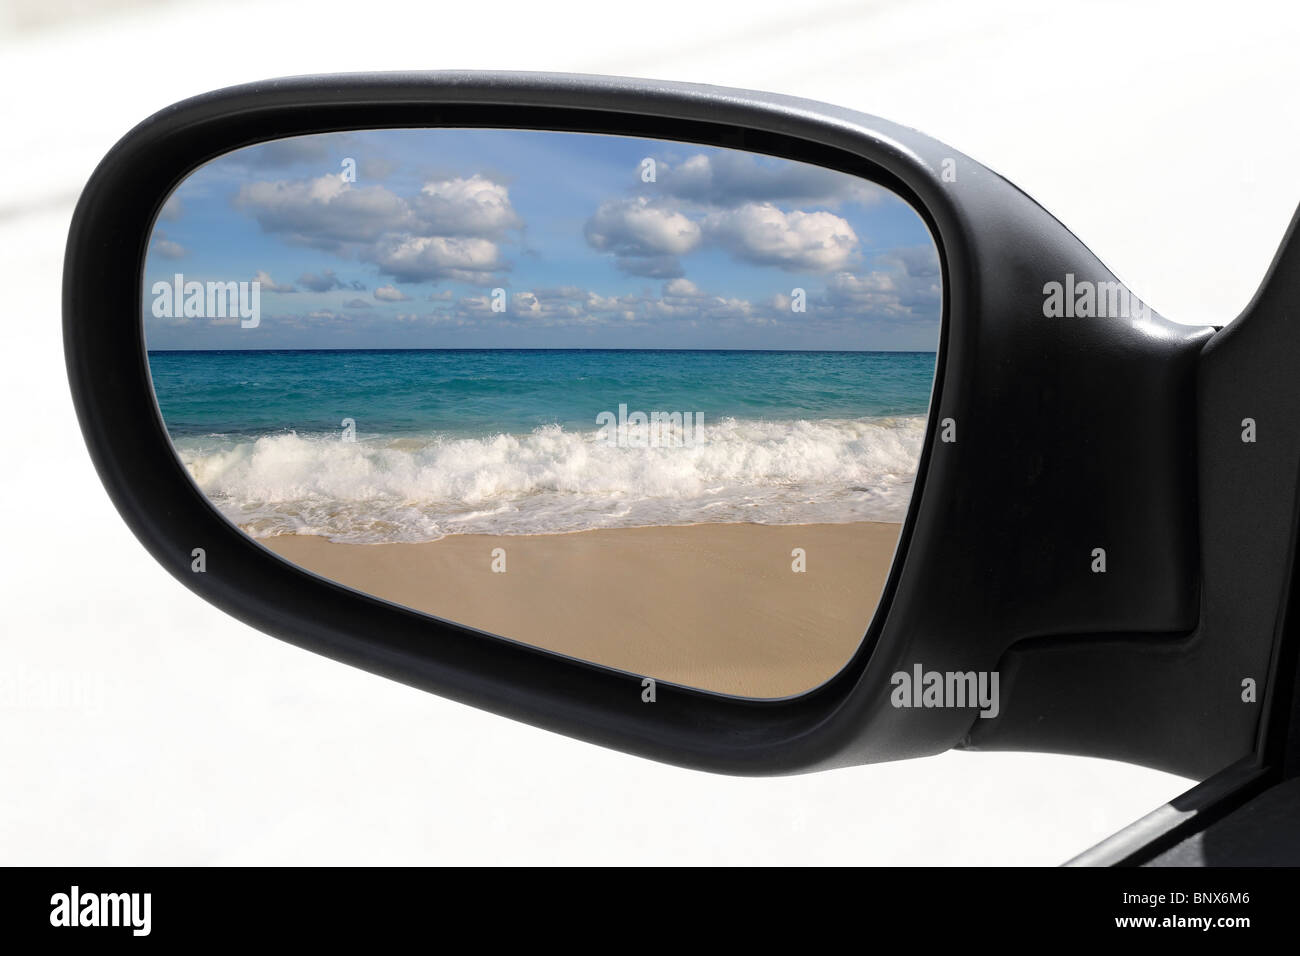 rearview car driving mirror view tropical caribbean sea turquoise beach Stock Photo